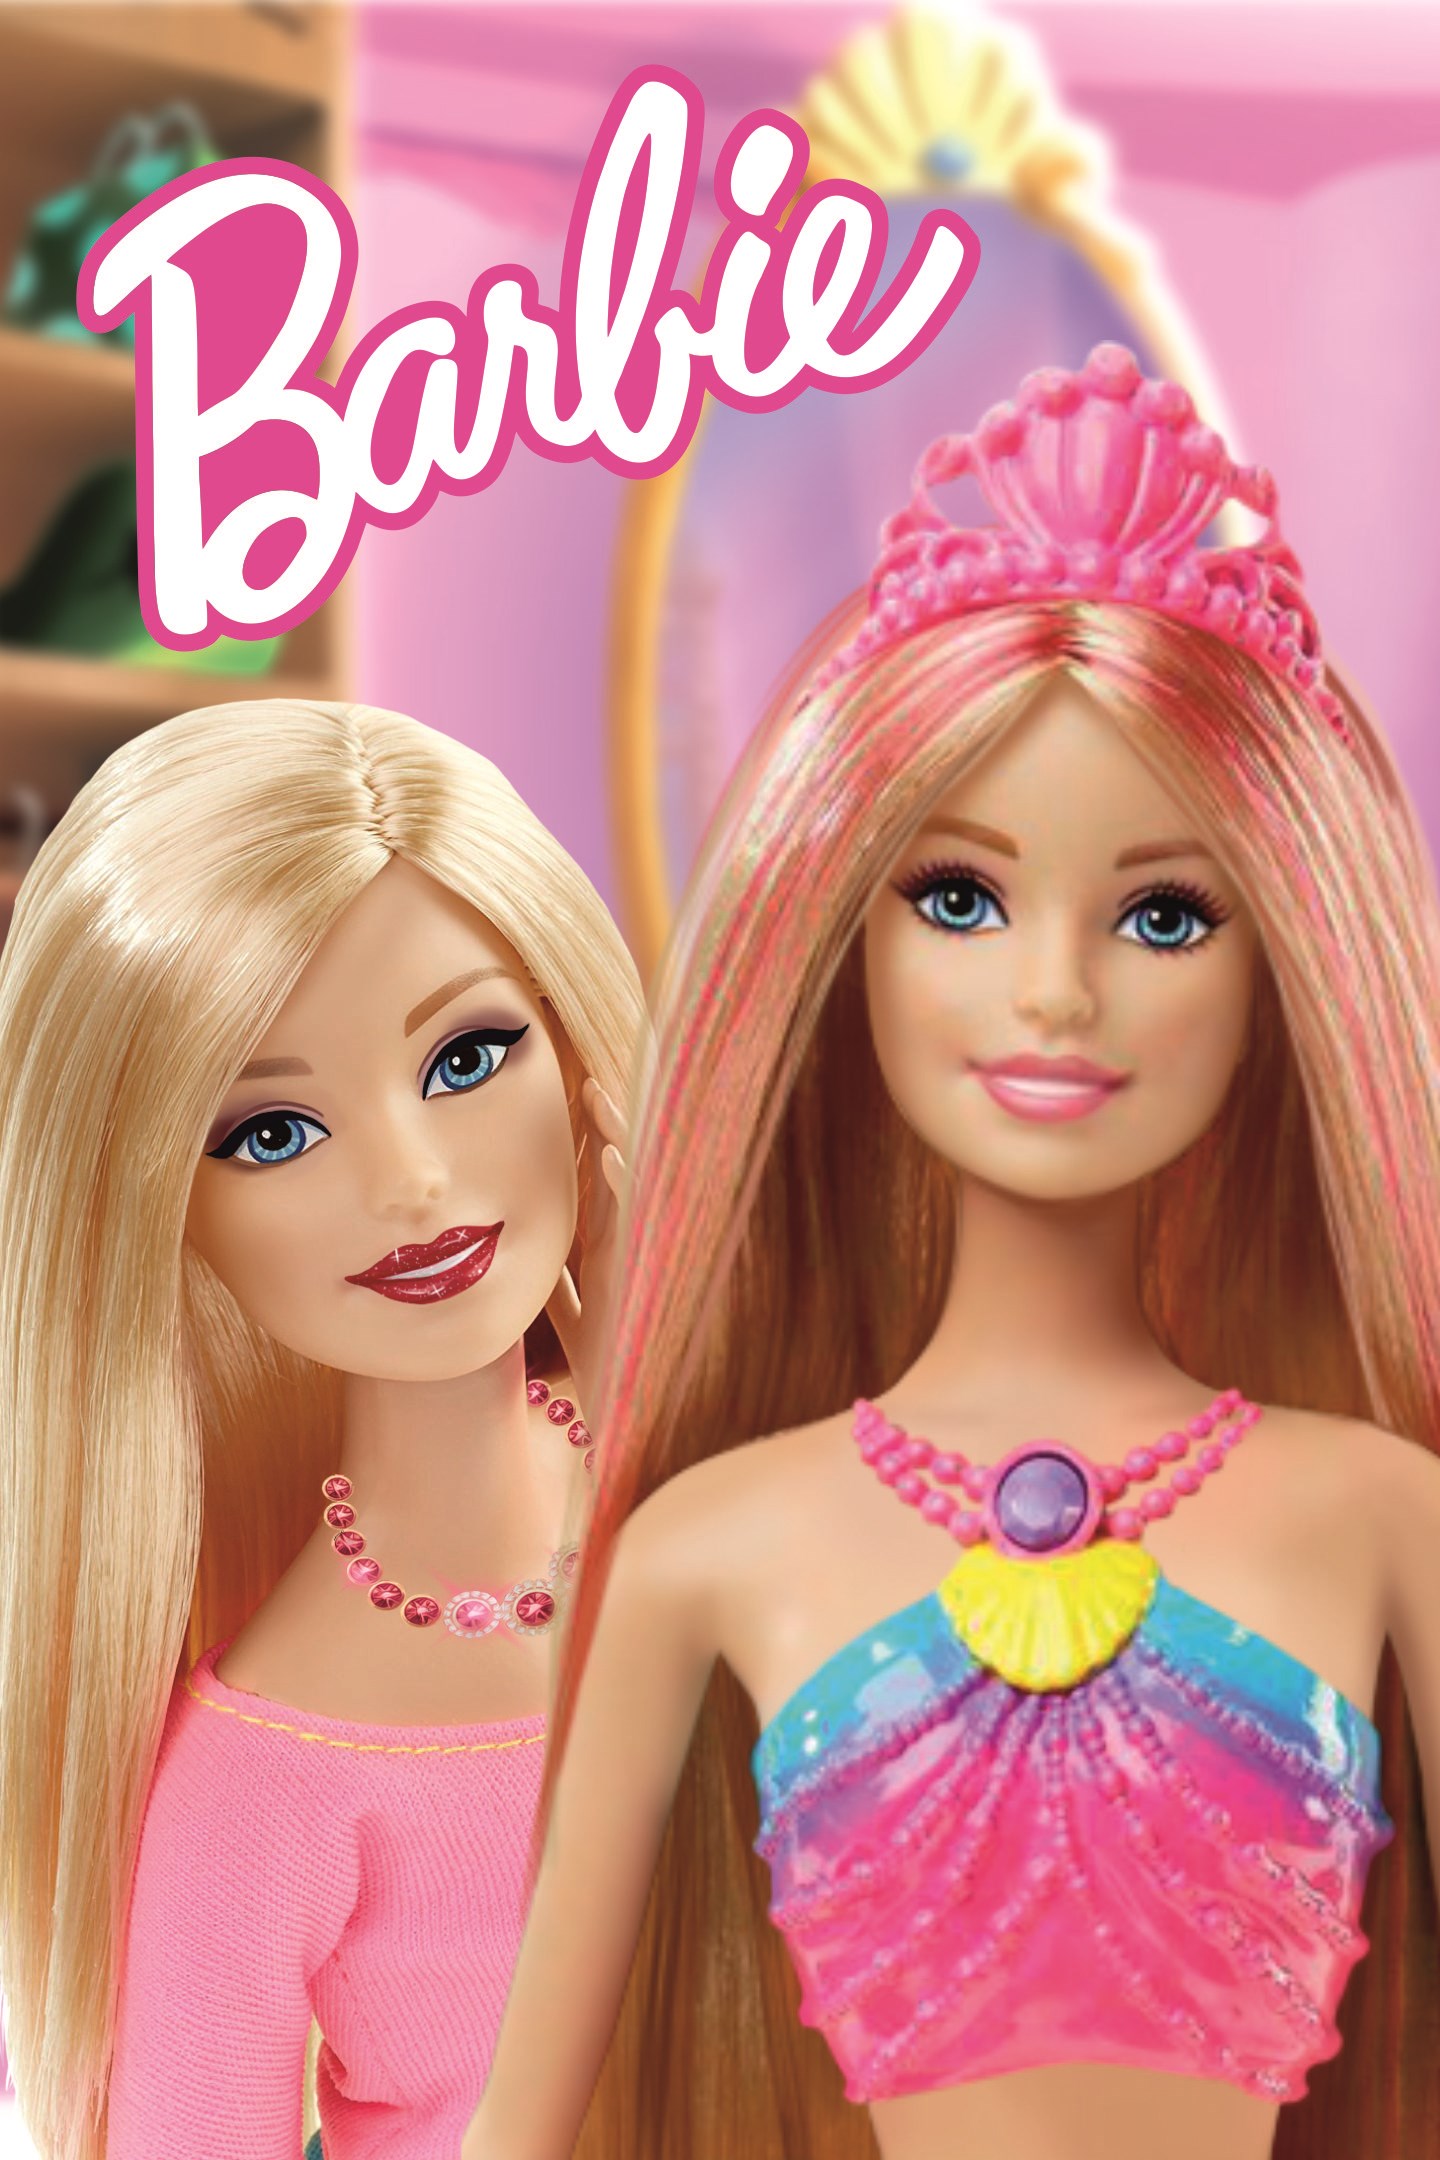 barbie games download for pc windows 7